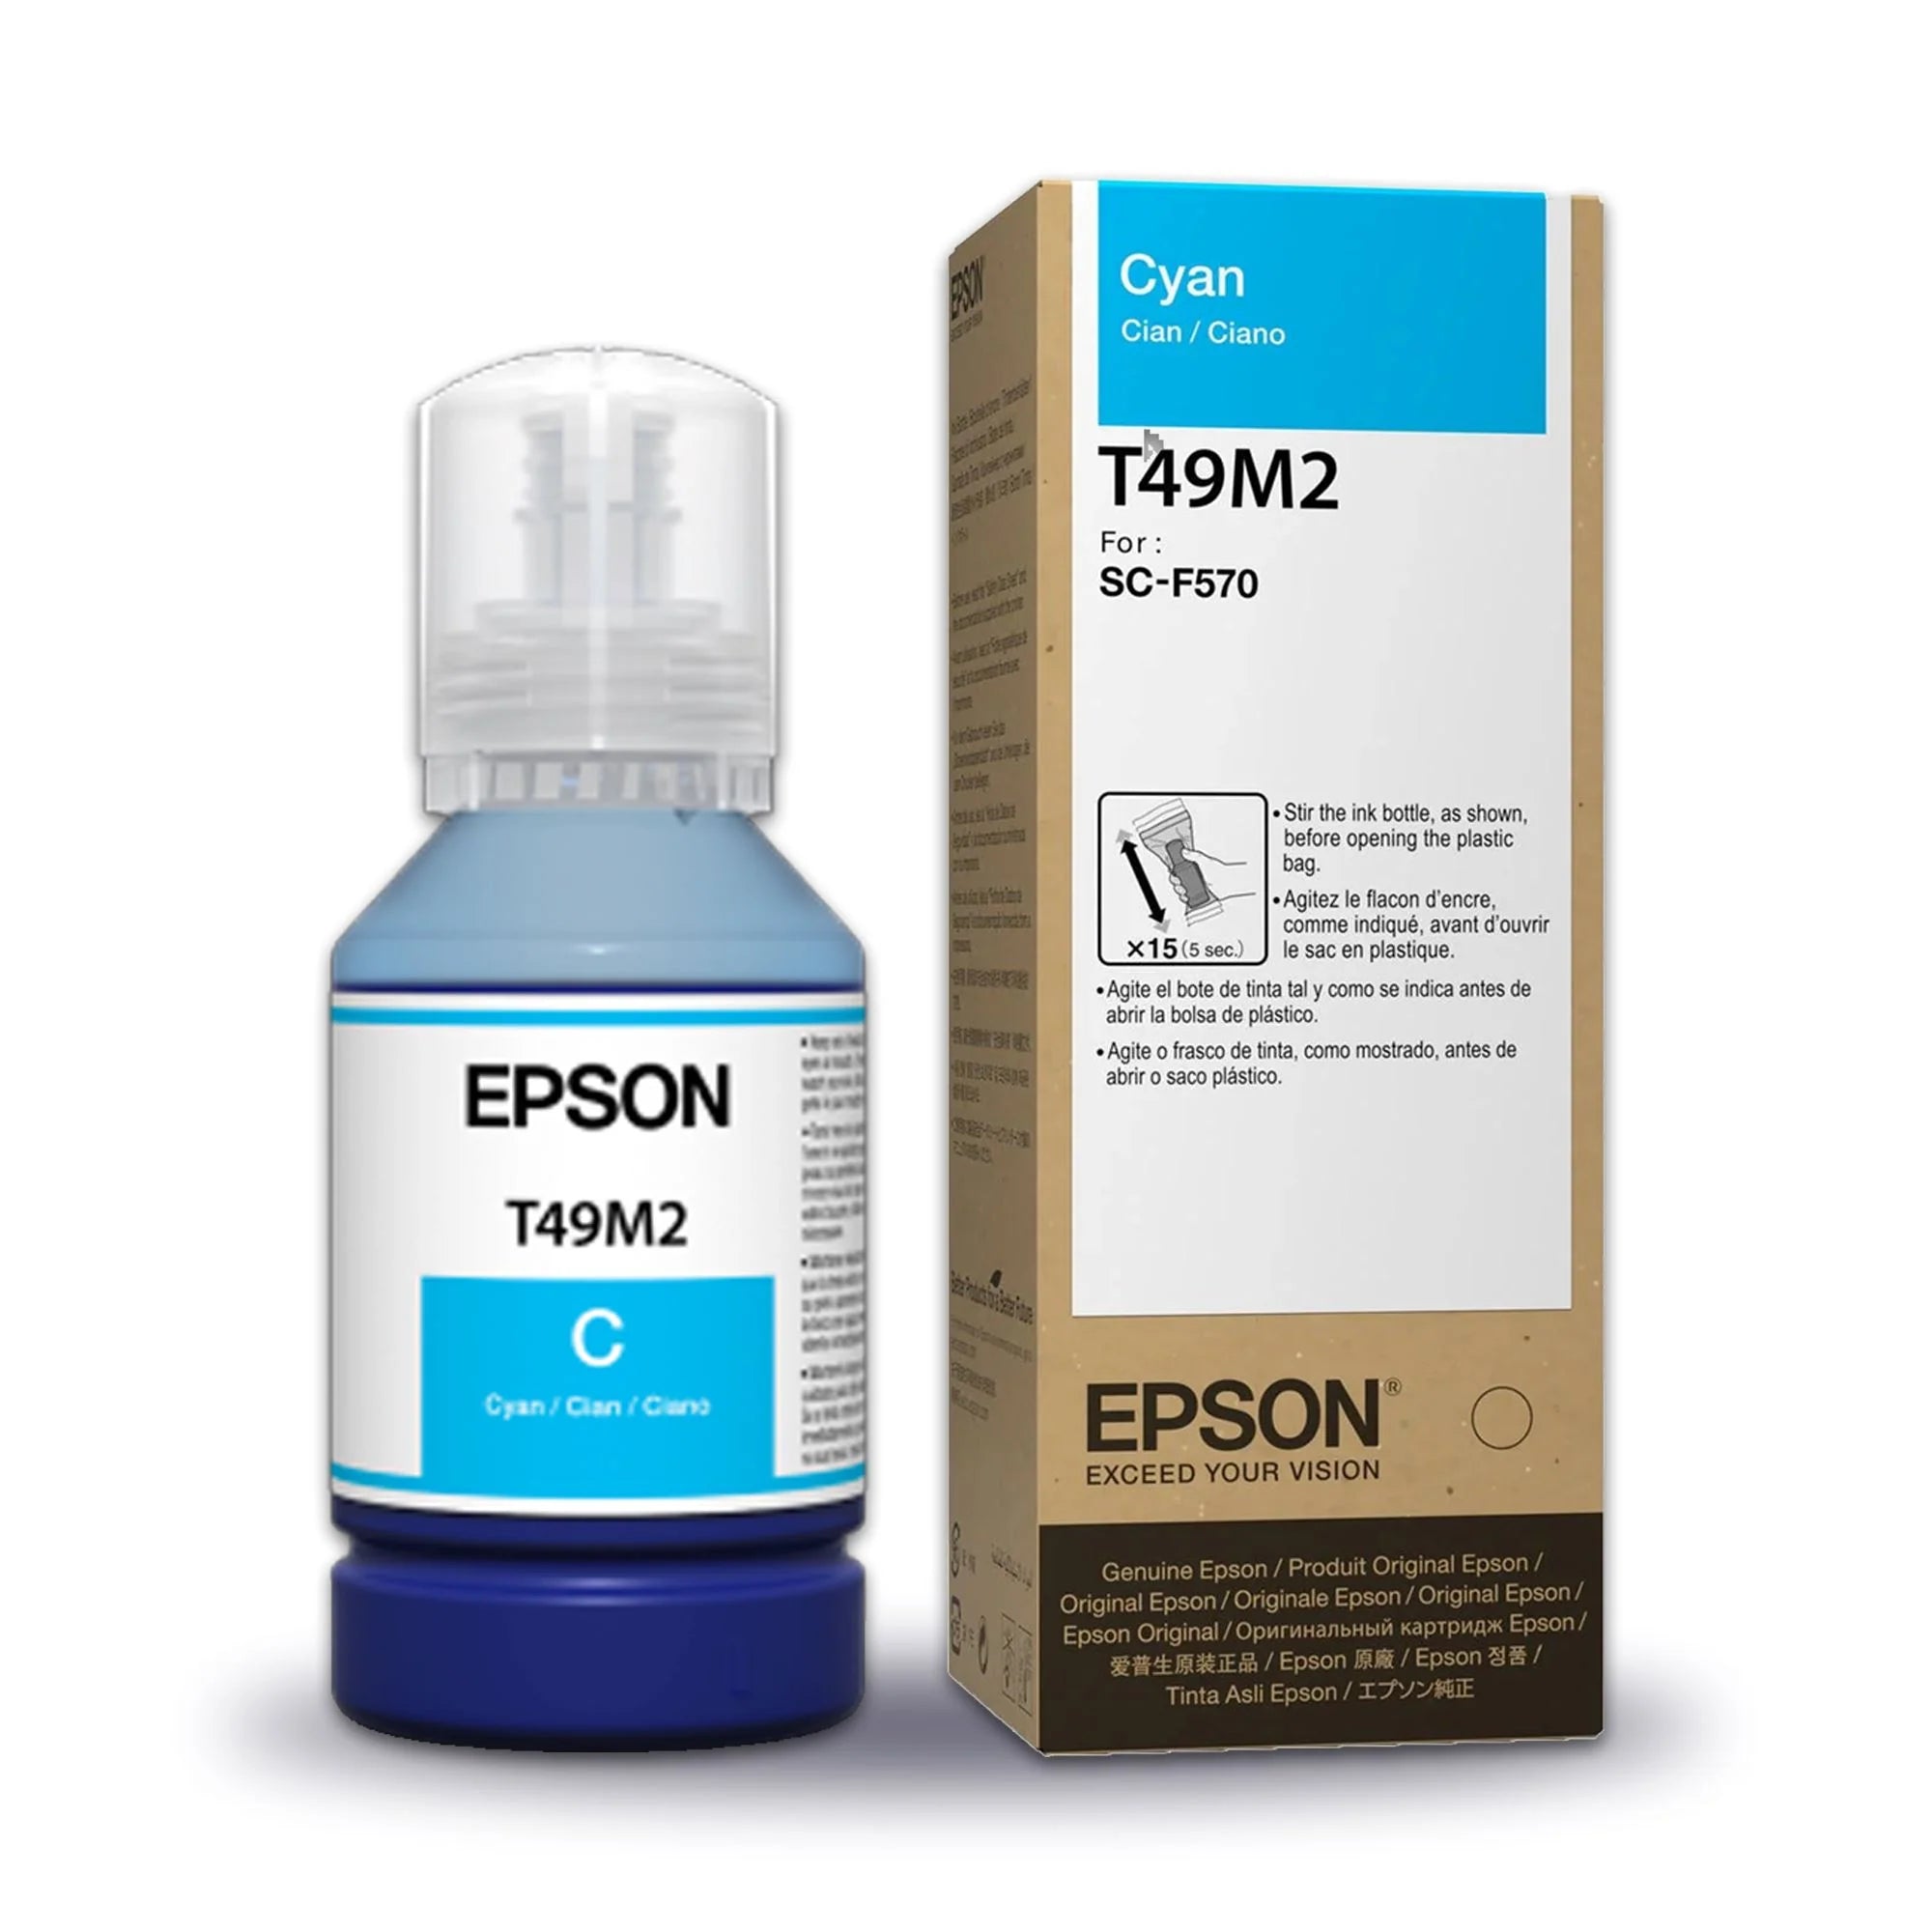 EPSON SureColor F170 and F570 Ink Bottles - 140 ml